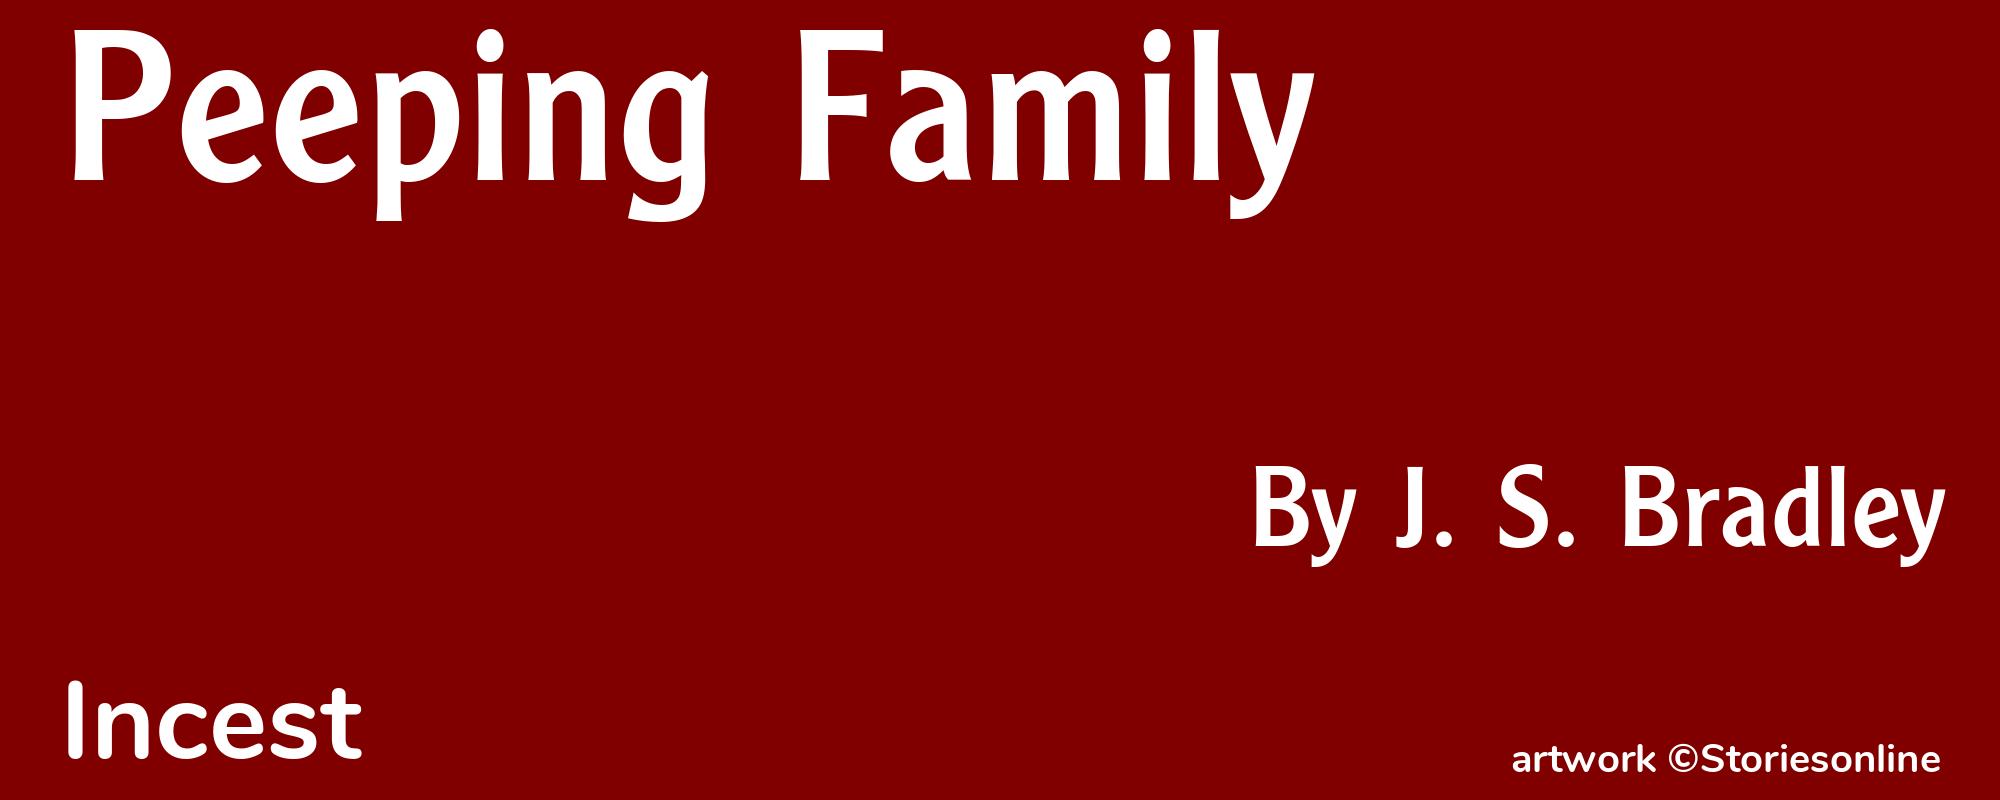 Peeping Family - Cover